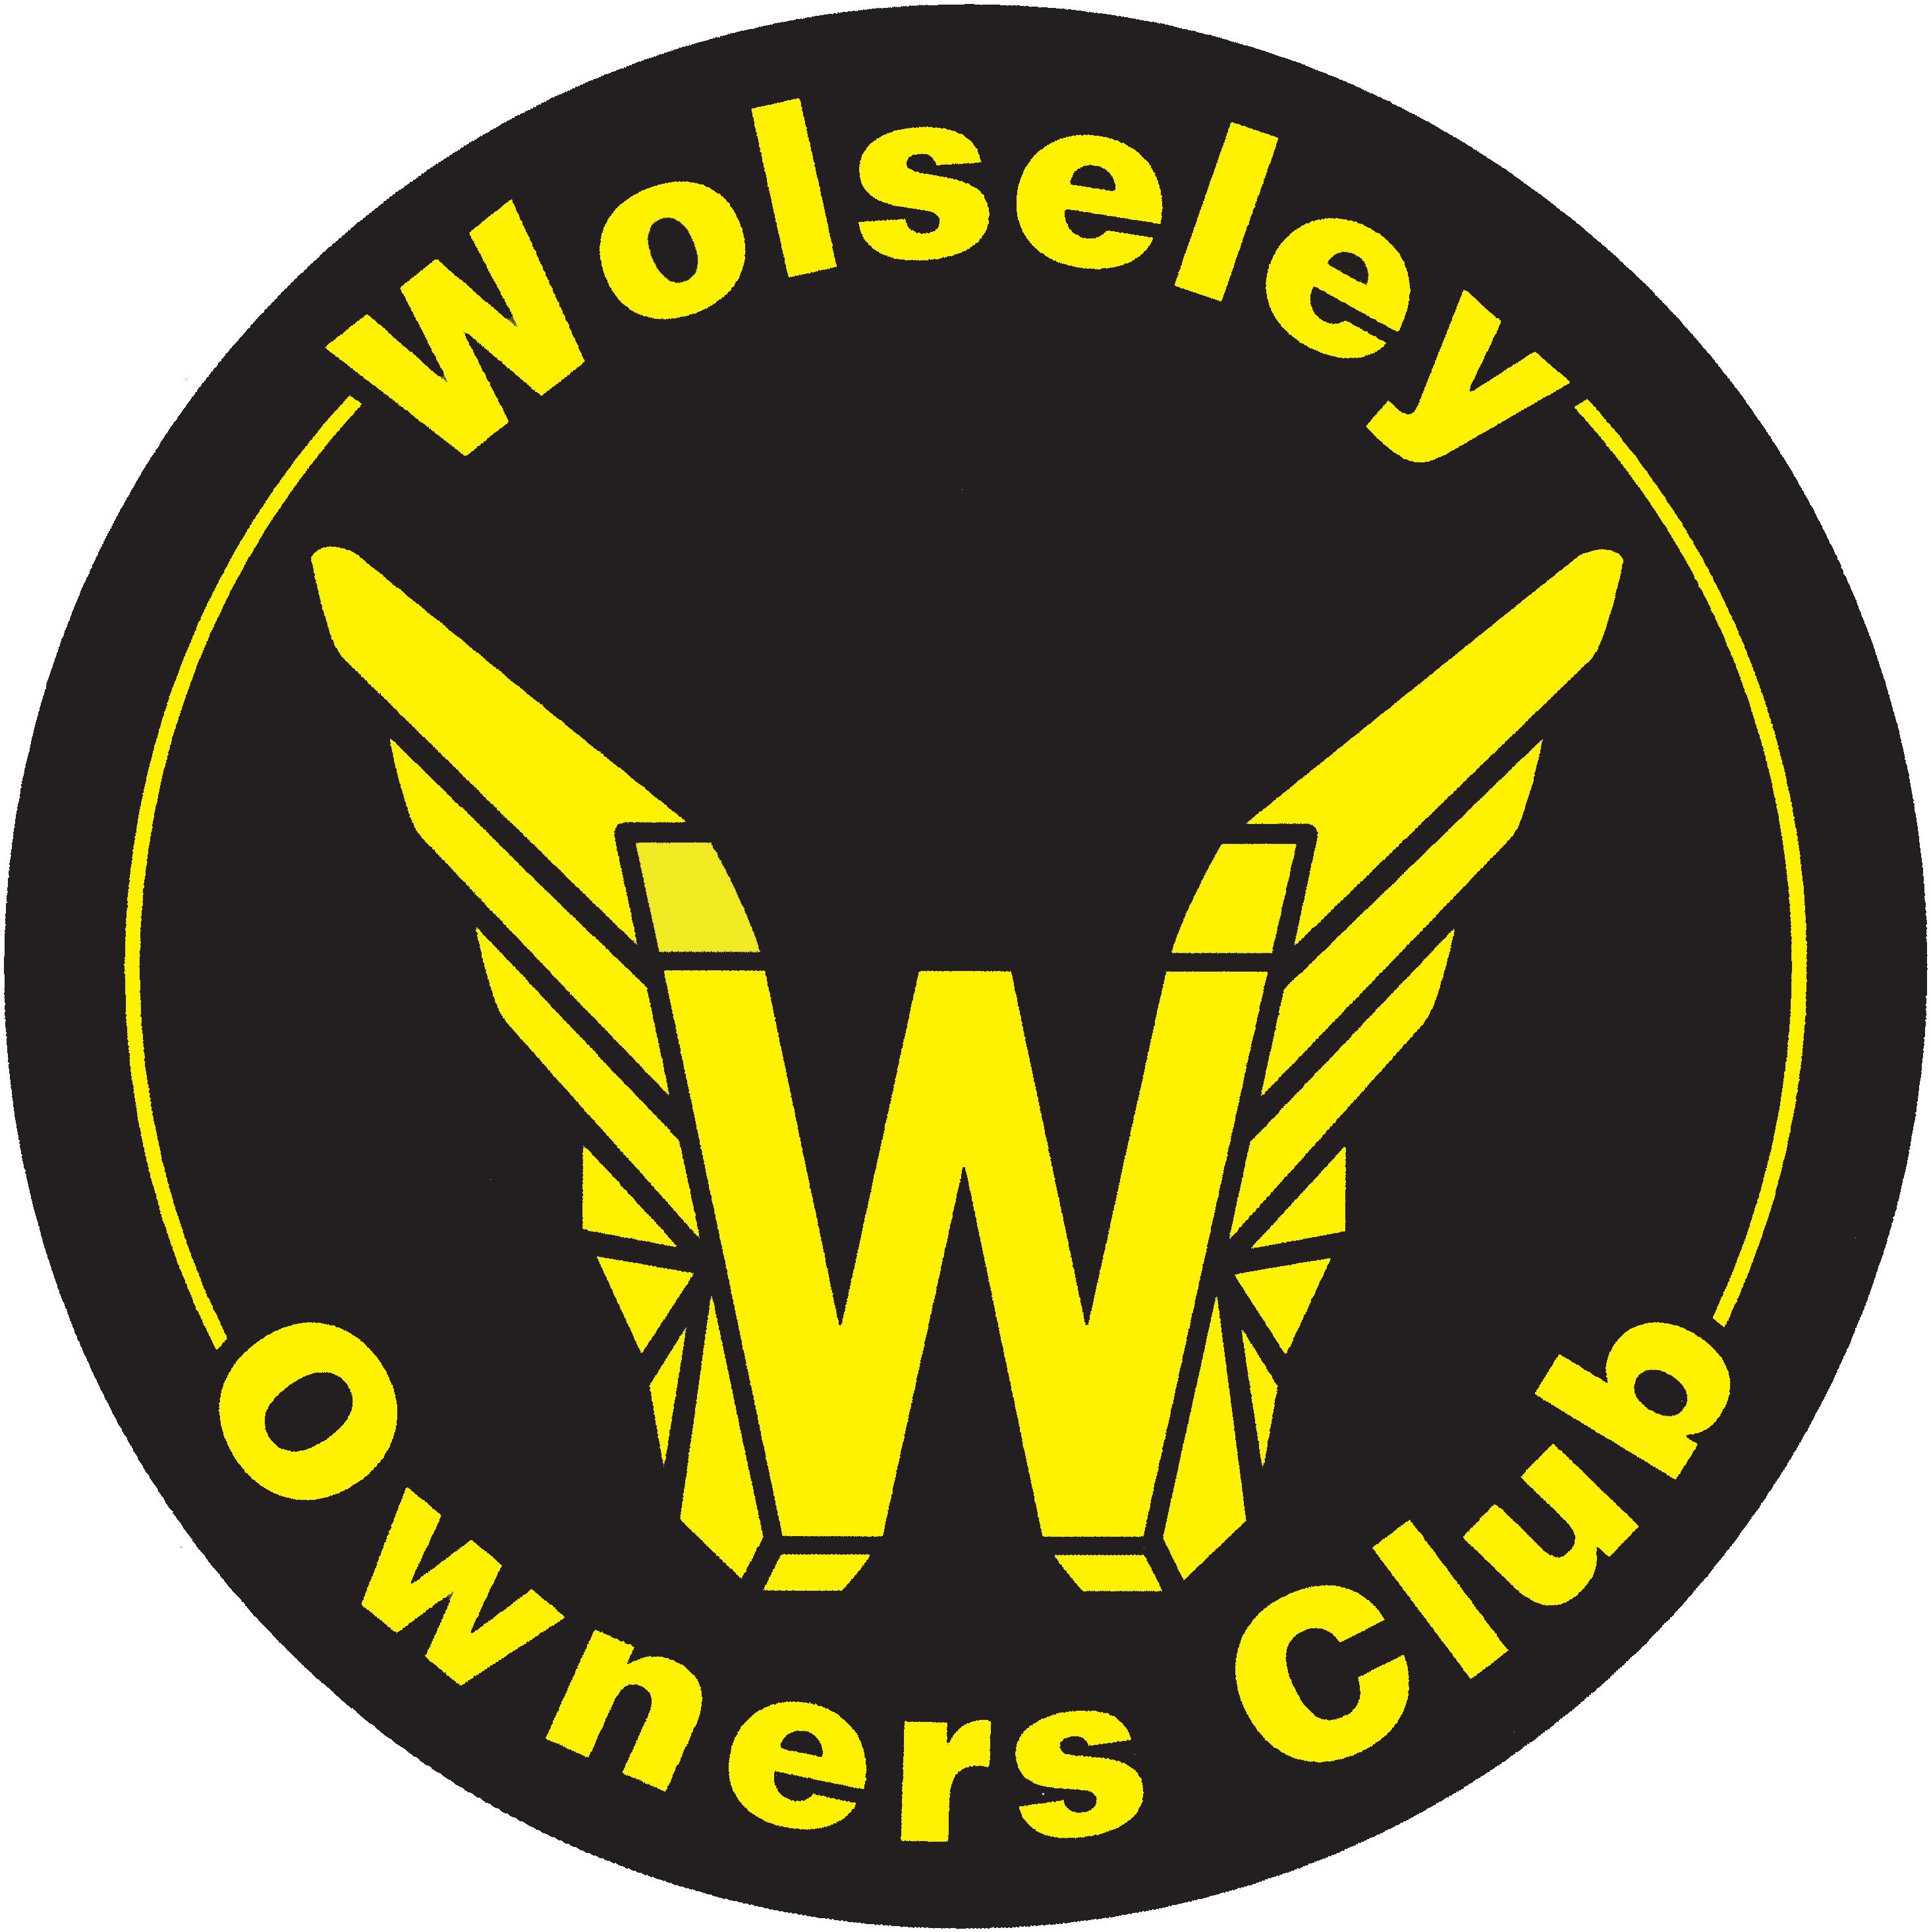 The Wolseley Owners Club